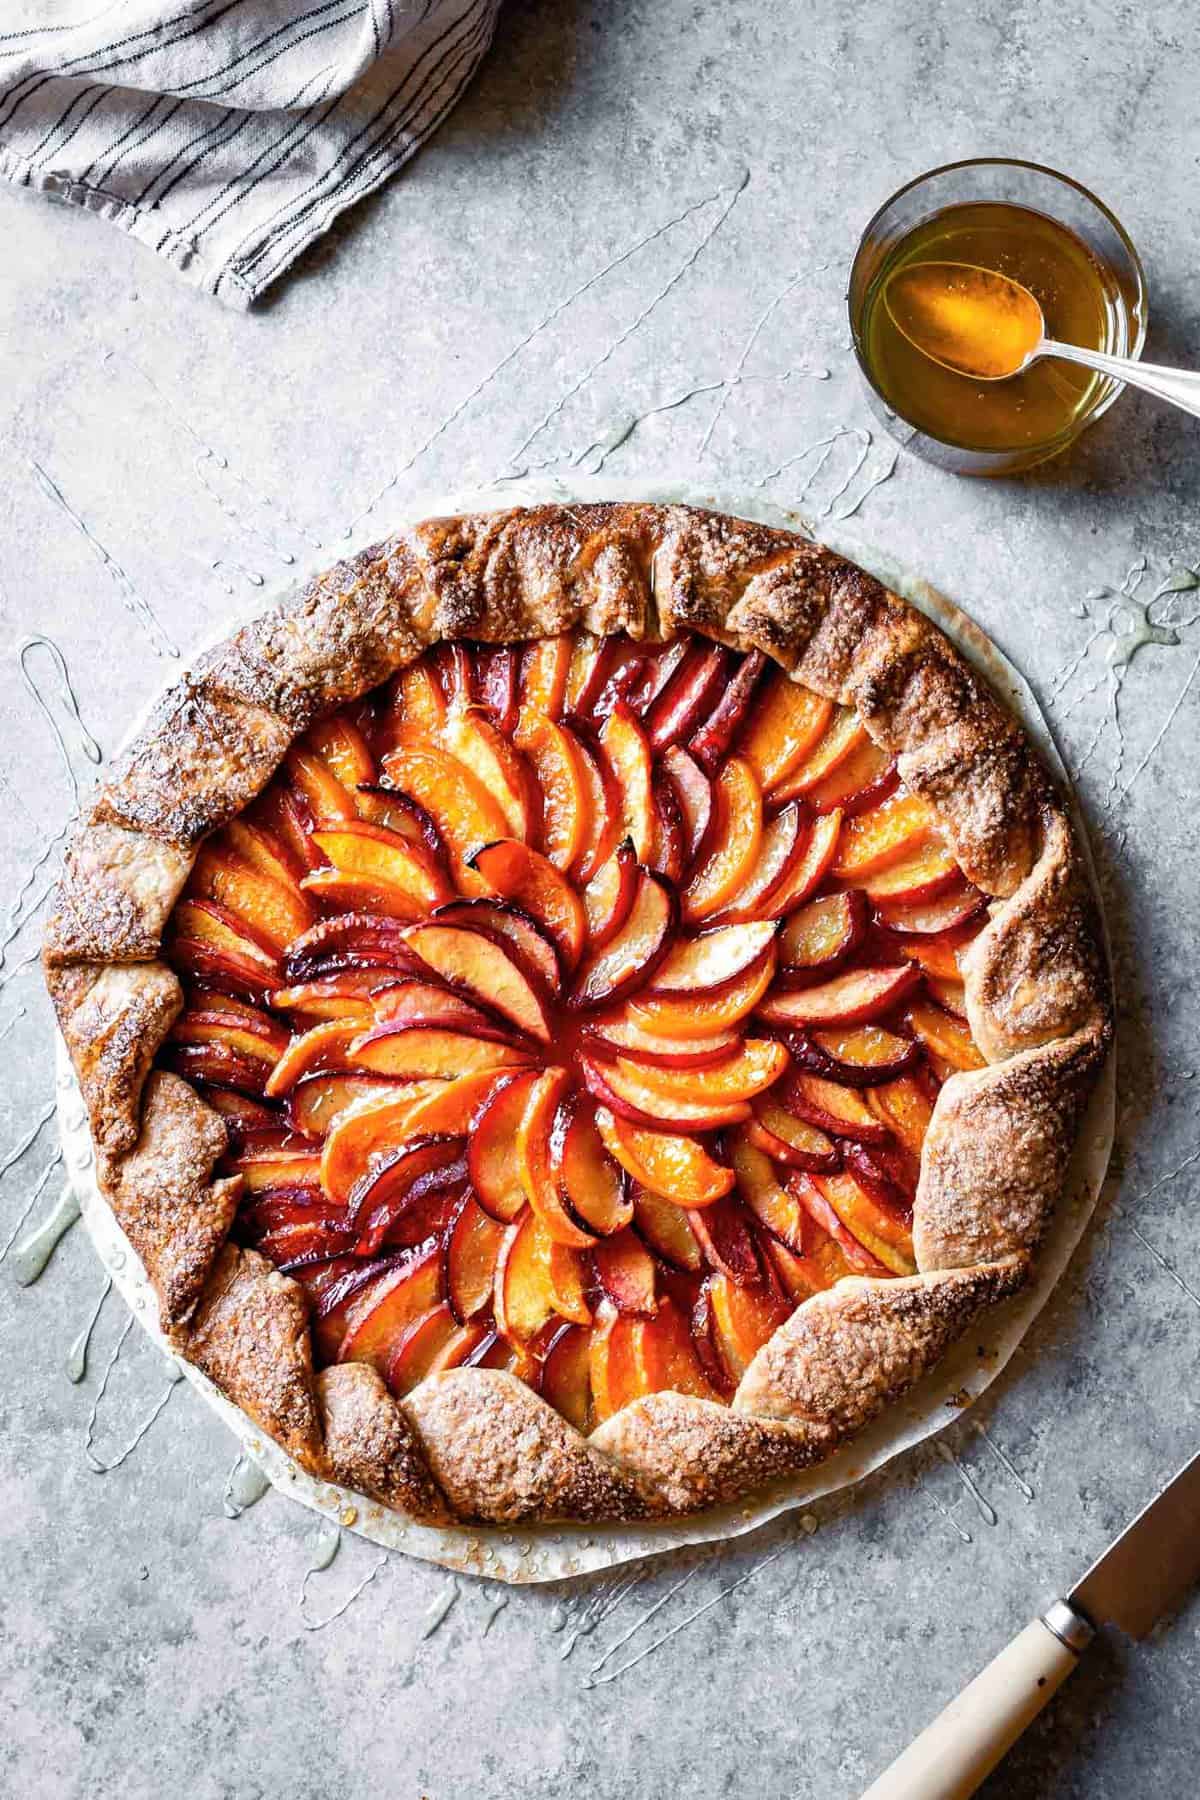 A baked galette with concentric circles of red and orange fruit that looks like a glorious sunflower